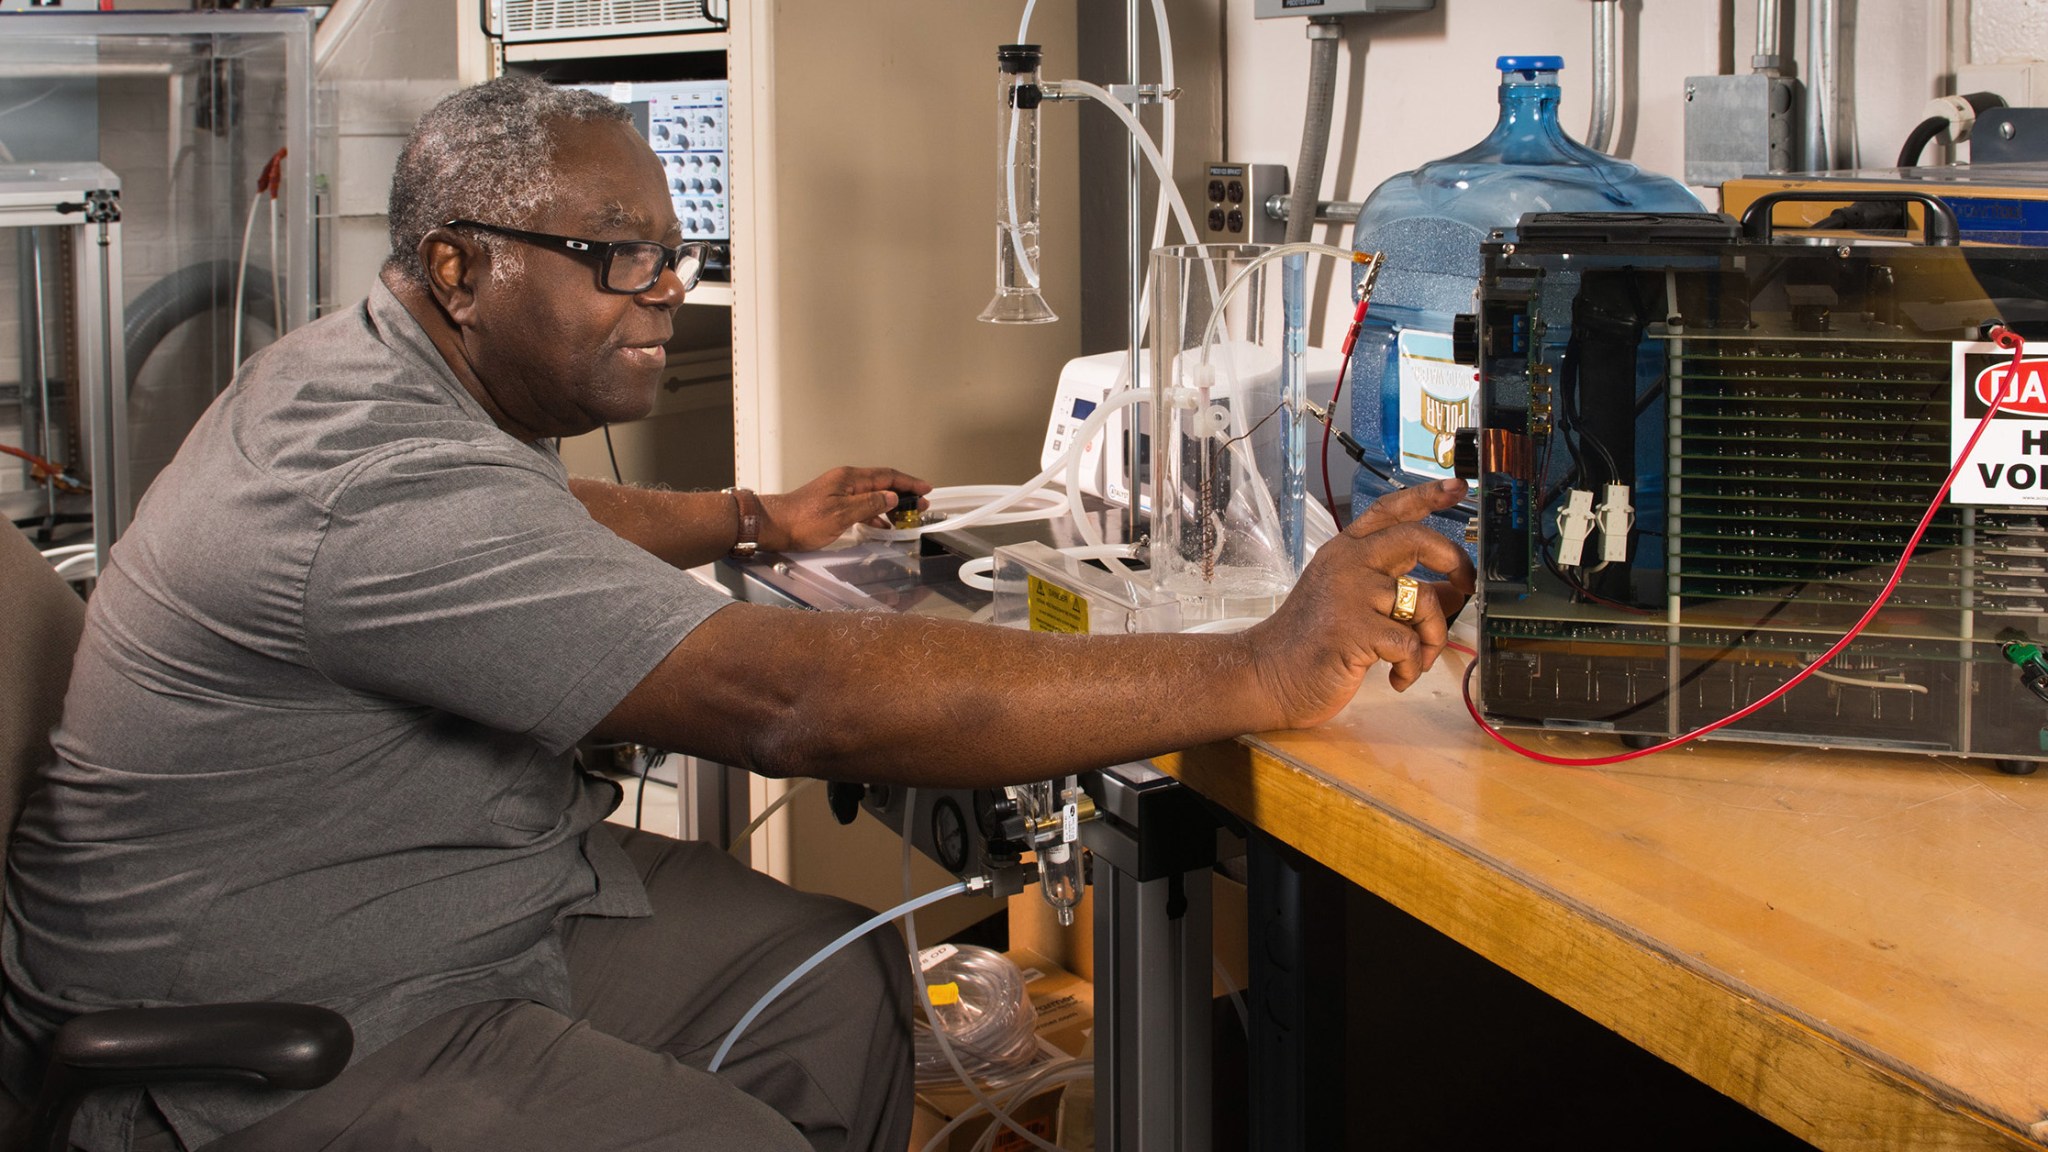 Man works with water purification equipment on desk.